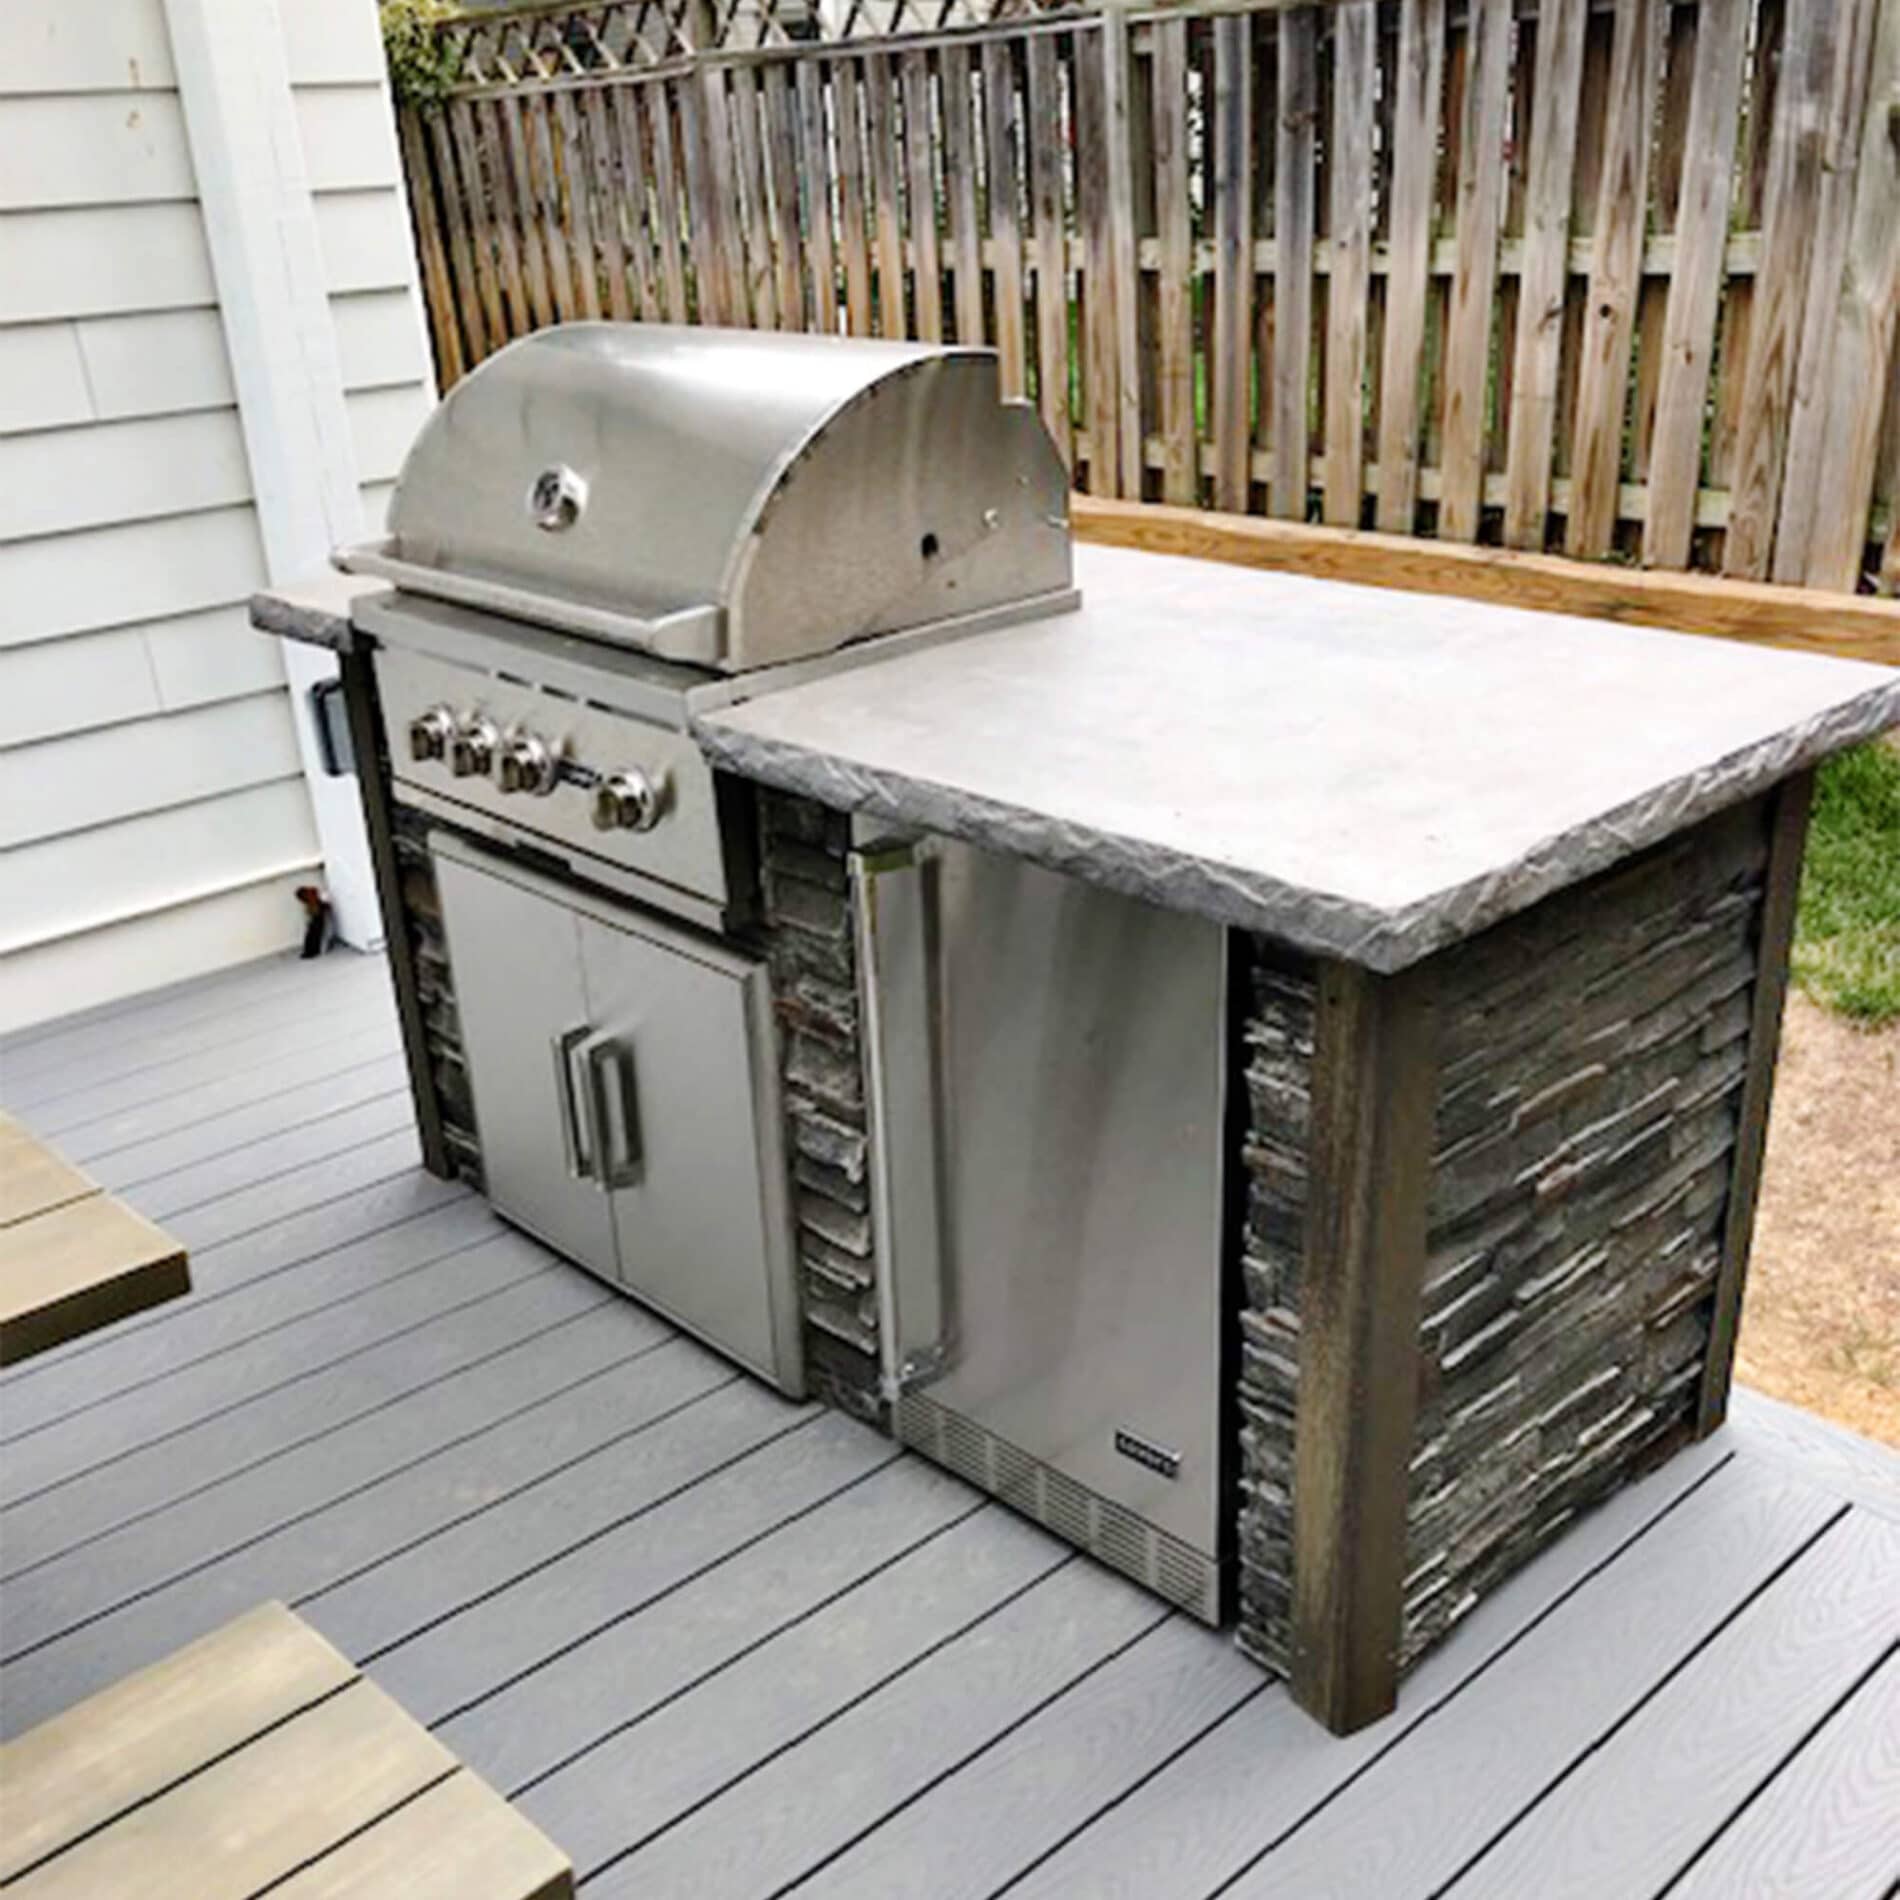 6' Grill Island - Stacked Stone  Stone Gray - Coyote Outdoor Living